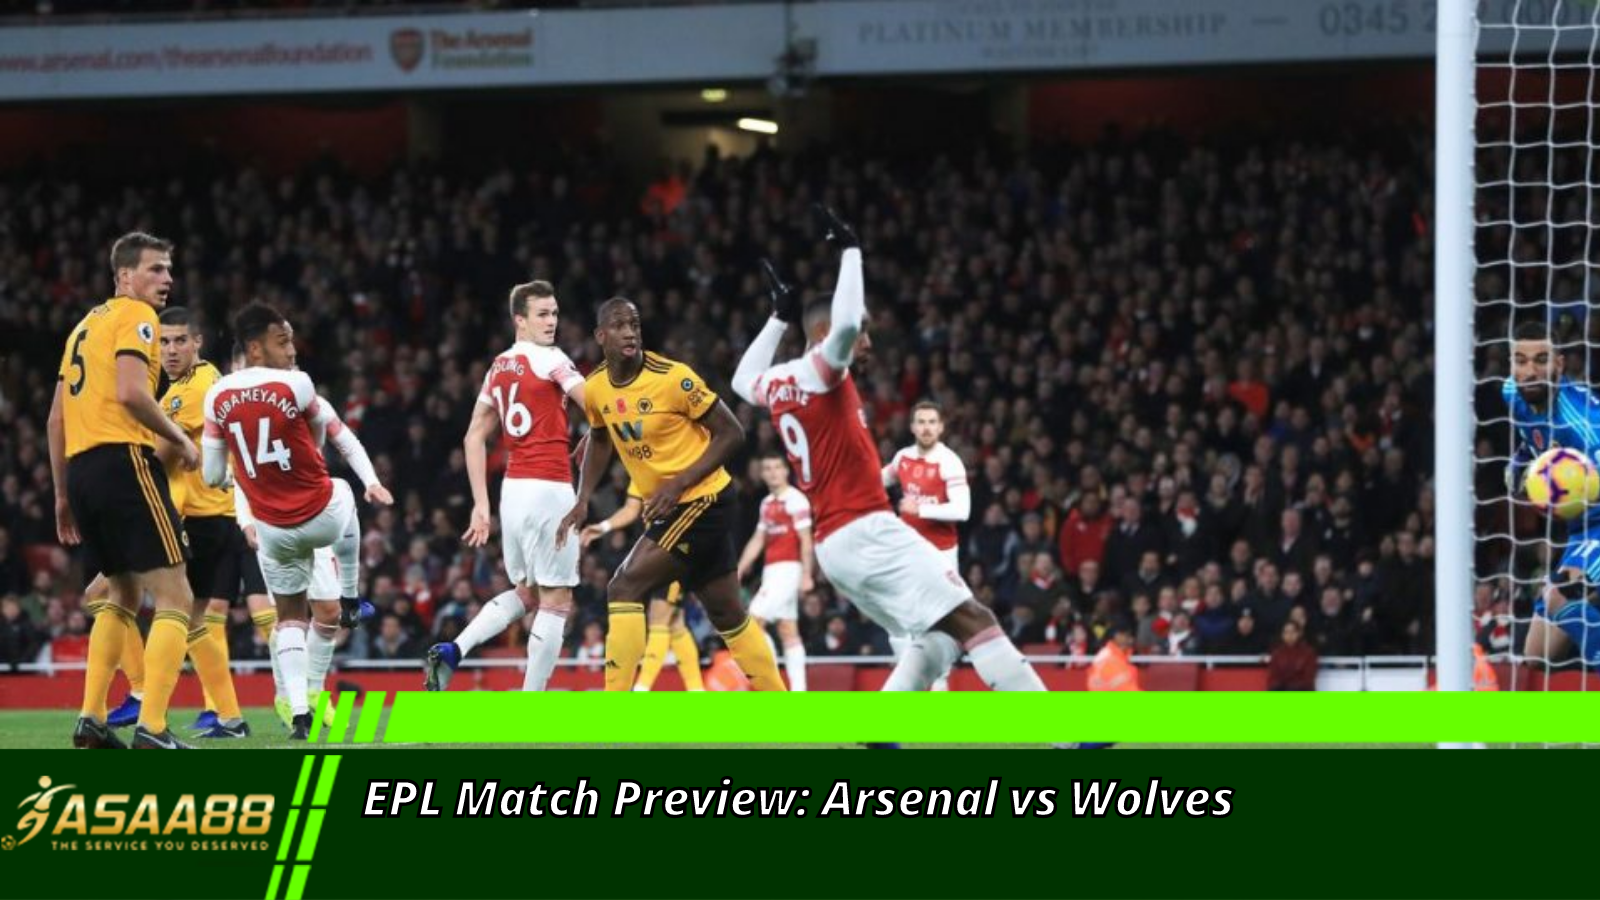 EPL Match Preview: Arsenal vs Wolves